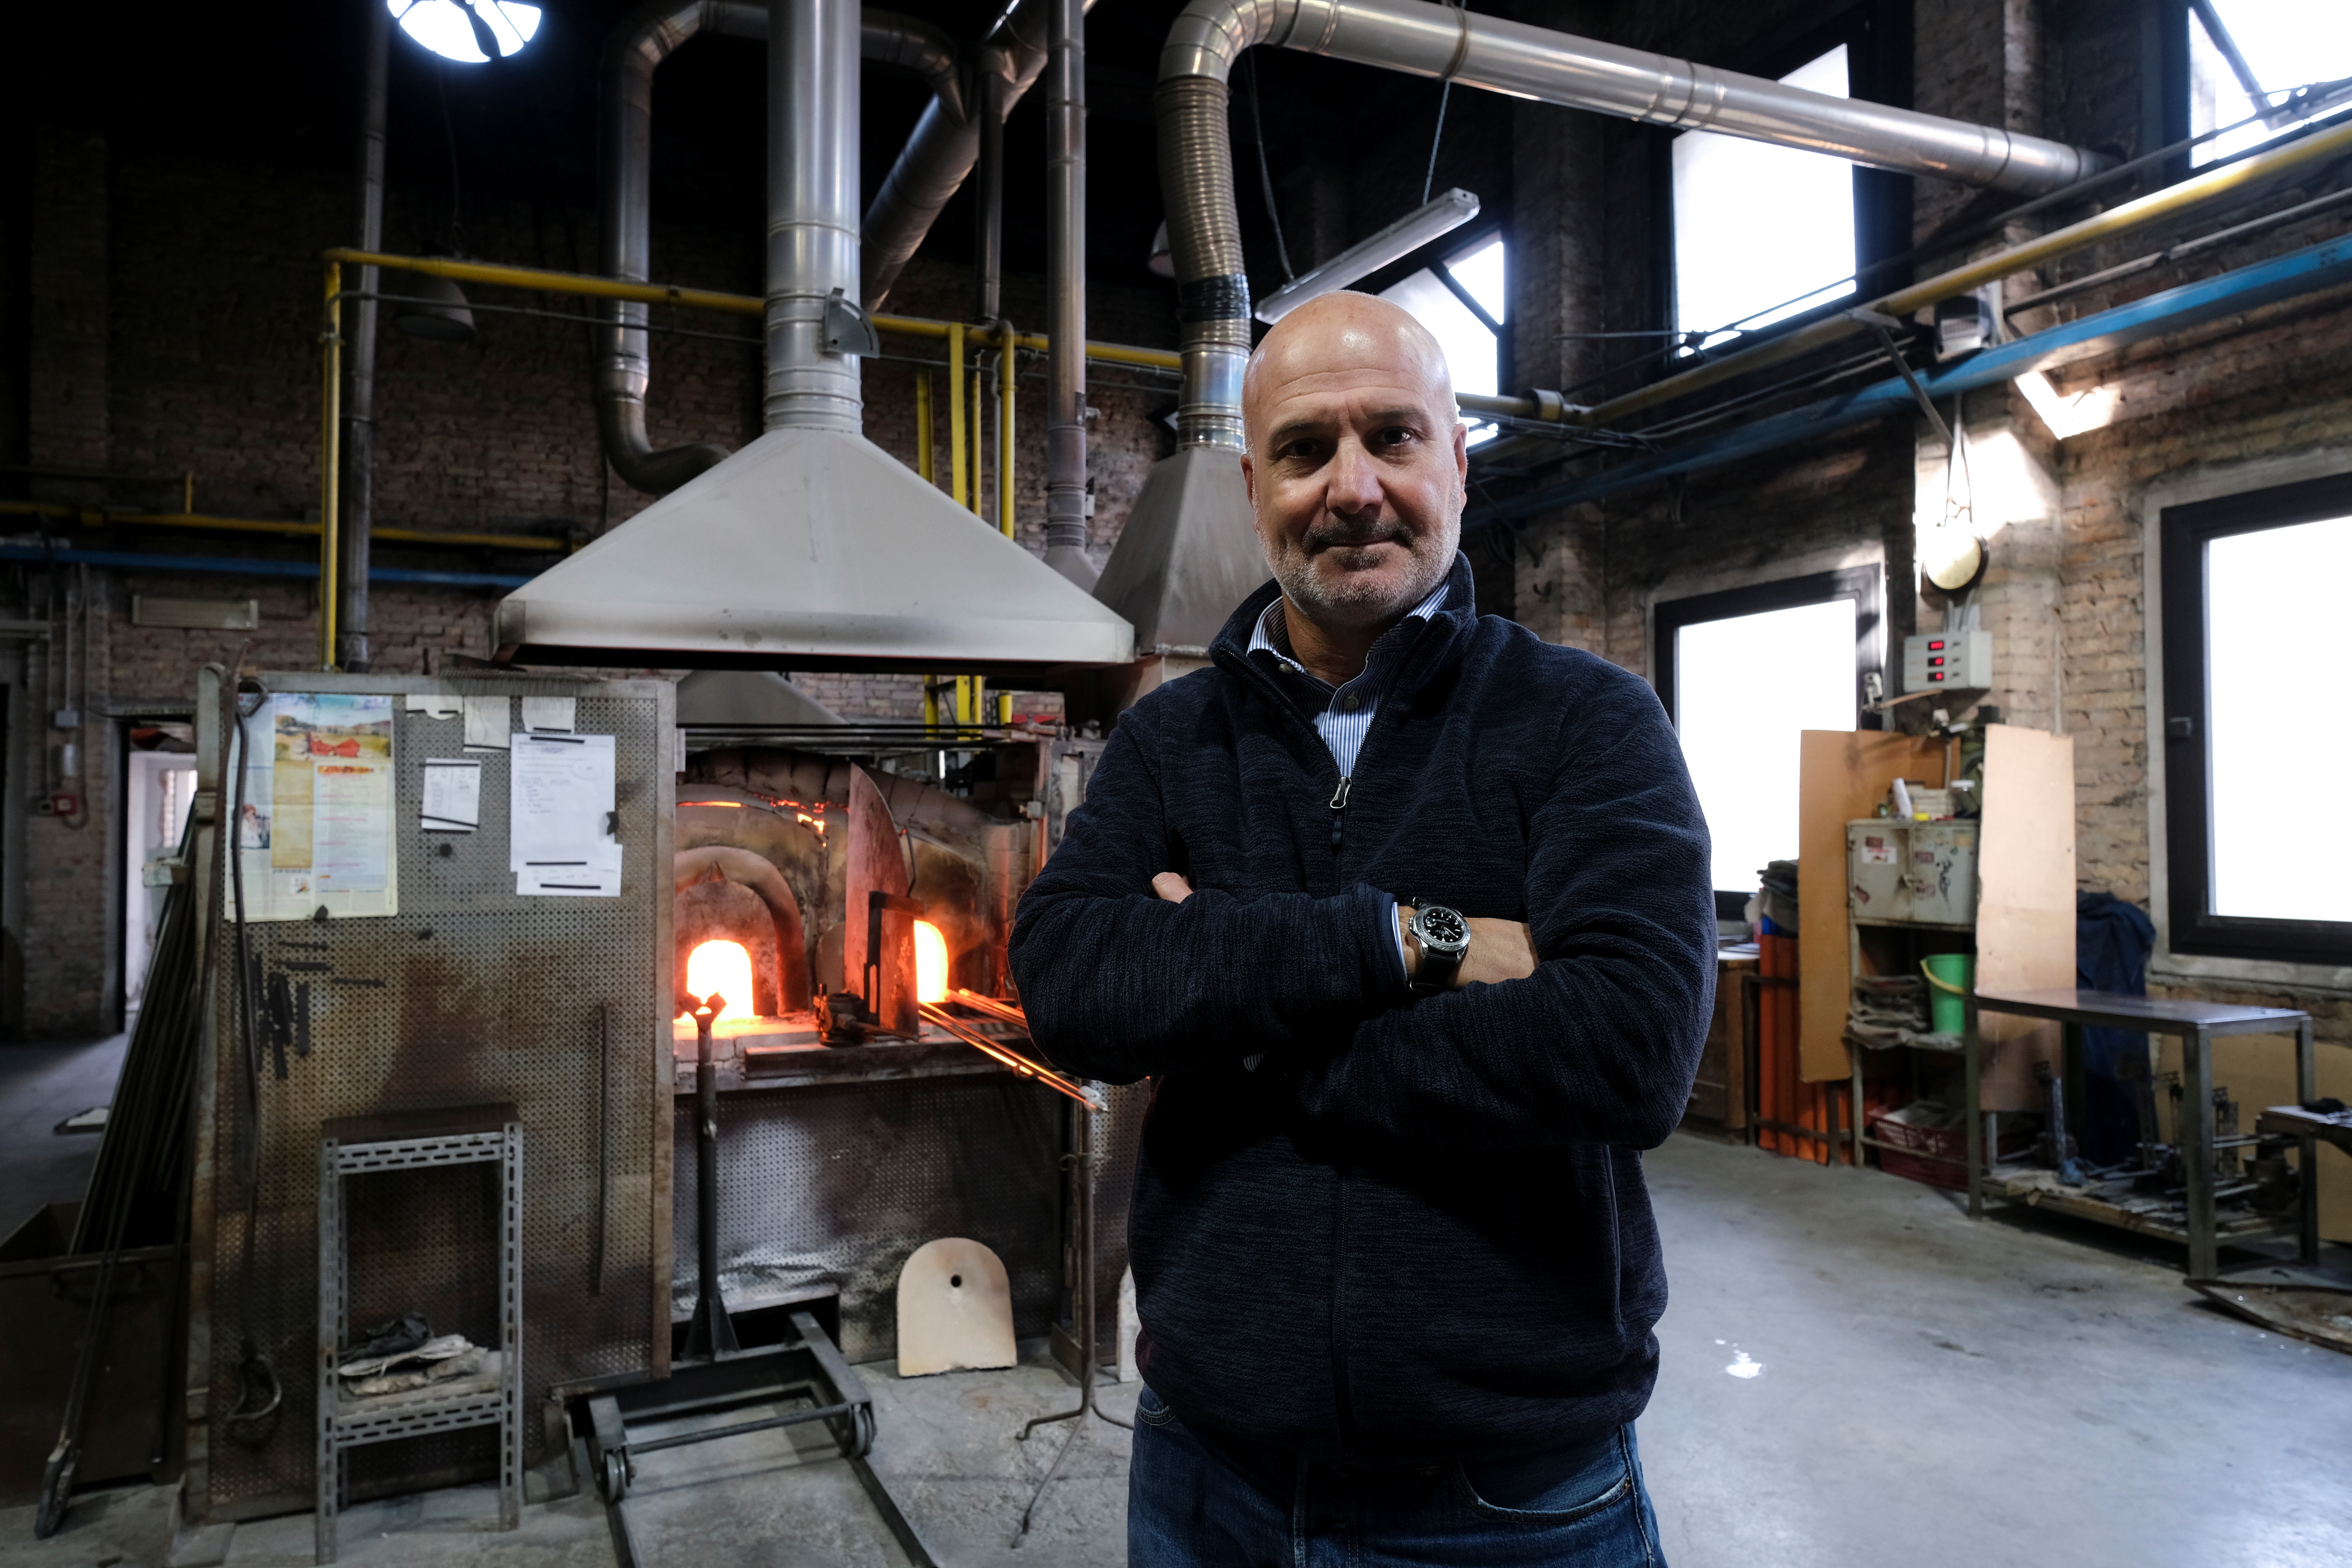 Venice's famous Murano glassblowers threatened by closure due to soaring gas prices